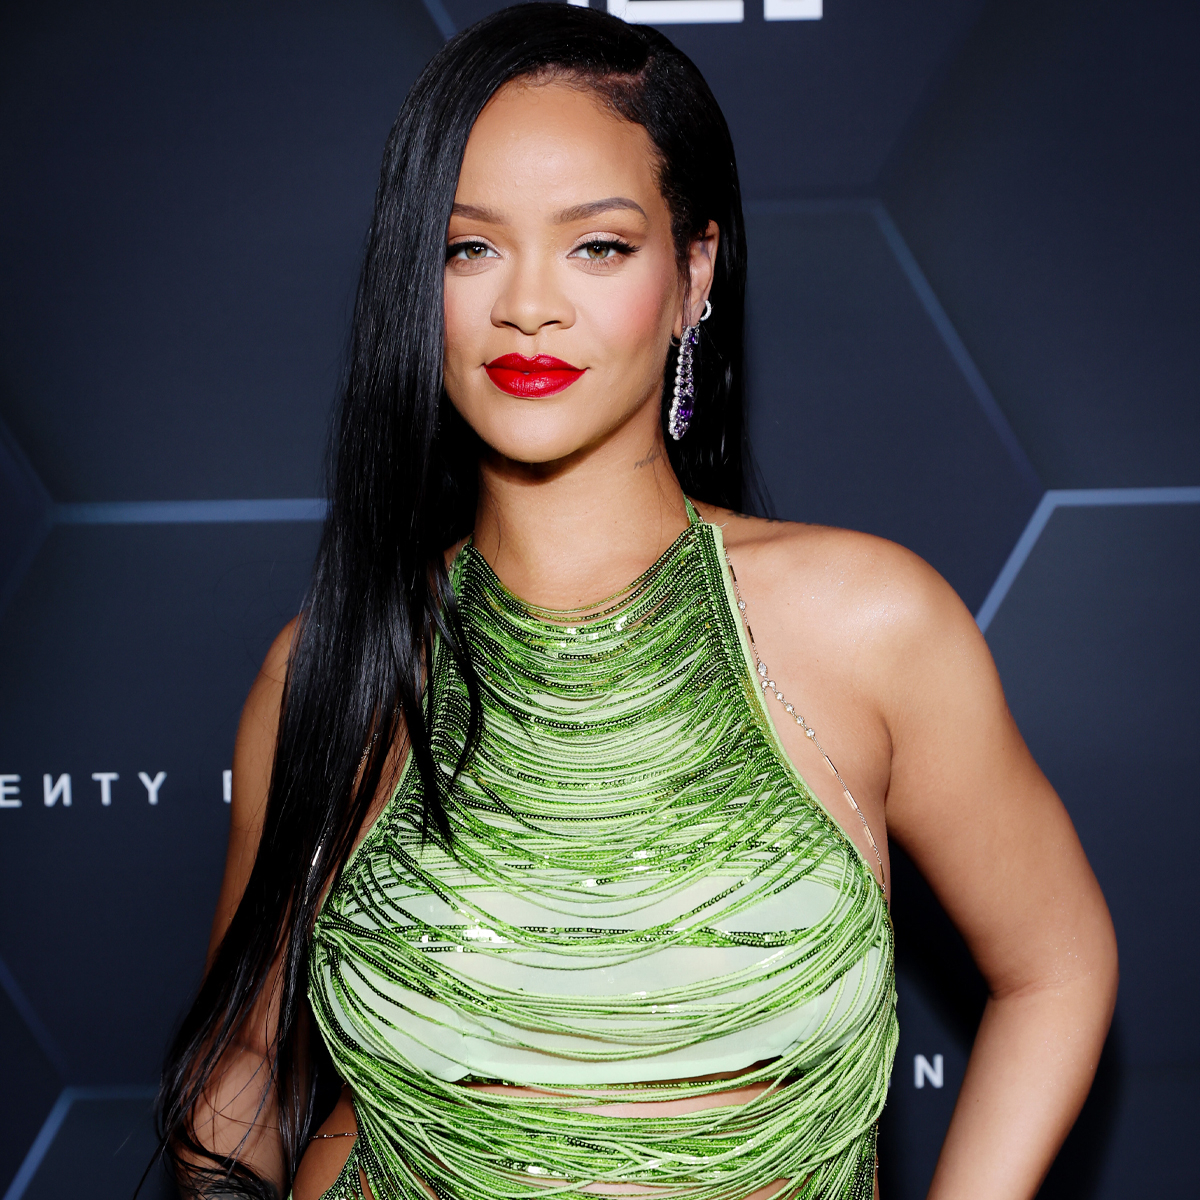 Rihanna wears nearly nothing to Chanel show